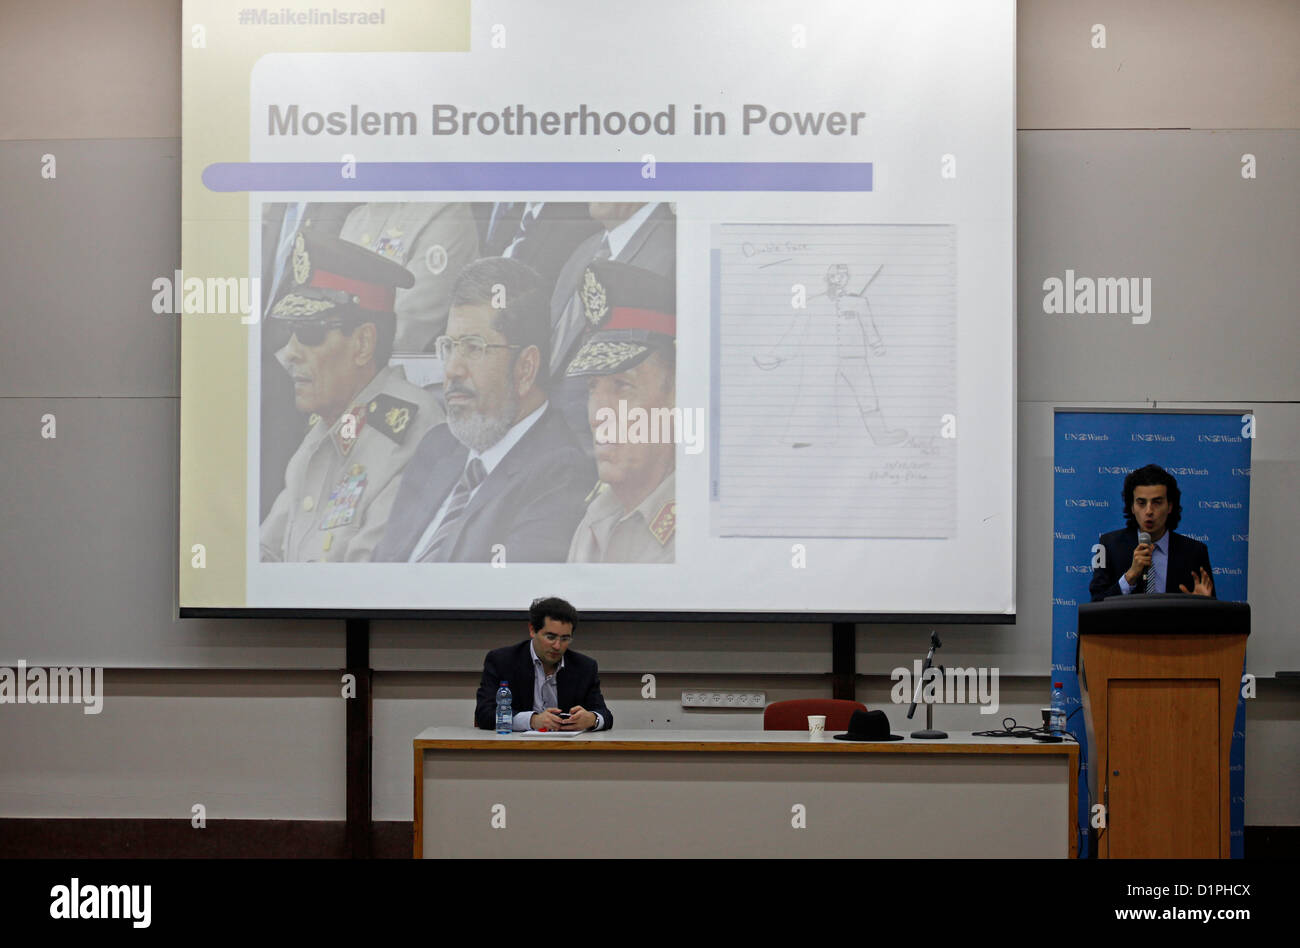 Maikel Nabil Sanad, an Egyptian blogger and political activist speaks next to an image showing the Egyptian PM Mohamed Morsi sitting with other military generals during a speech in Tel Aviv University on 02 January 2012. Maikel became famous in 2010 for refusing to serve in the Egyptian army, then in 2011 for his role in the Egyptian revolution. He is known for promoting liberal democratic values in Egypt, and campaigning for peaceful relations between Egypt and Israel. Stock Photo